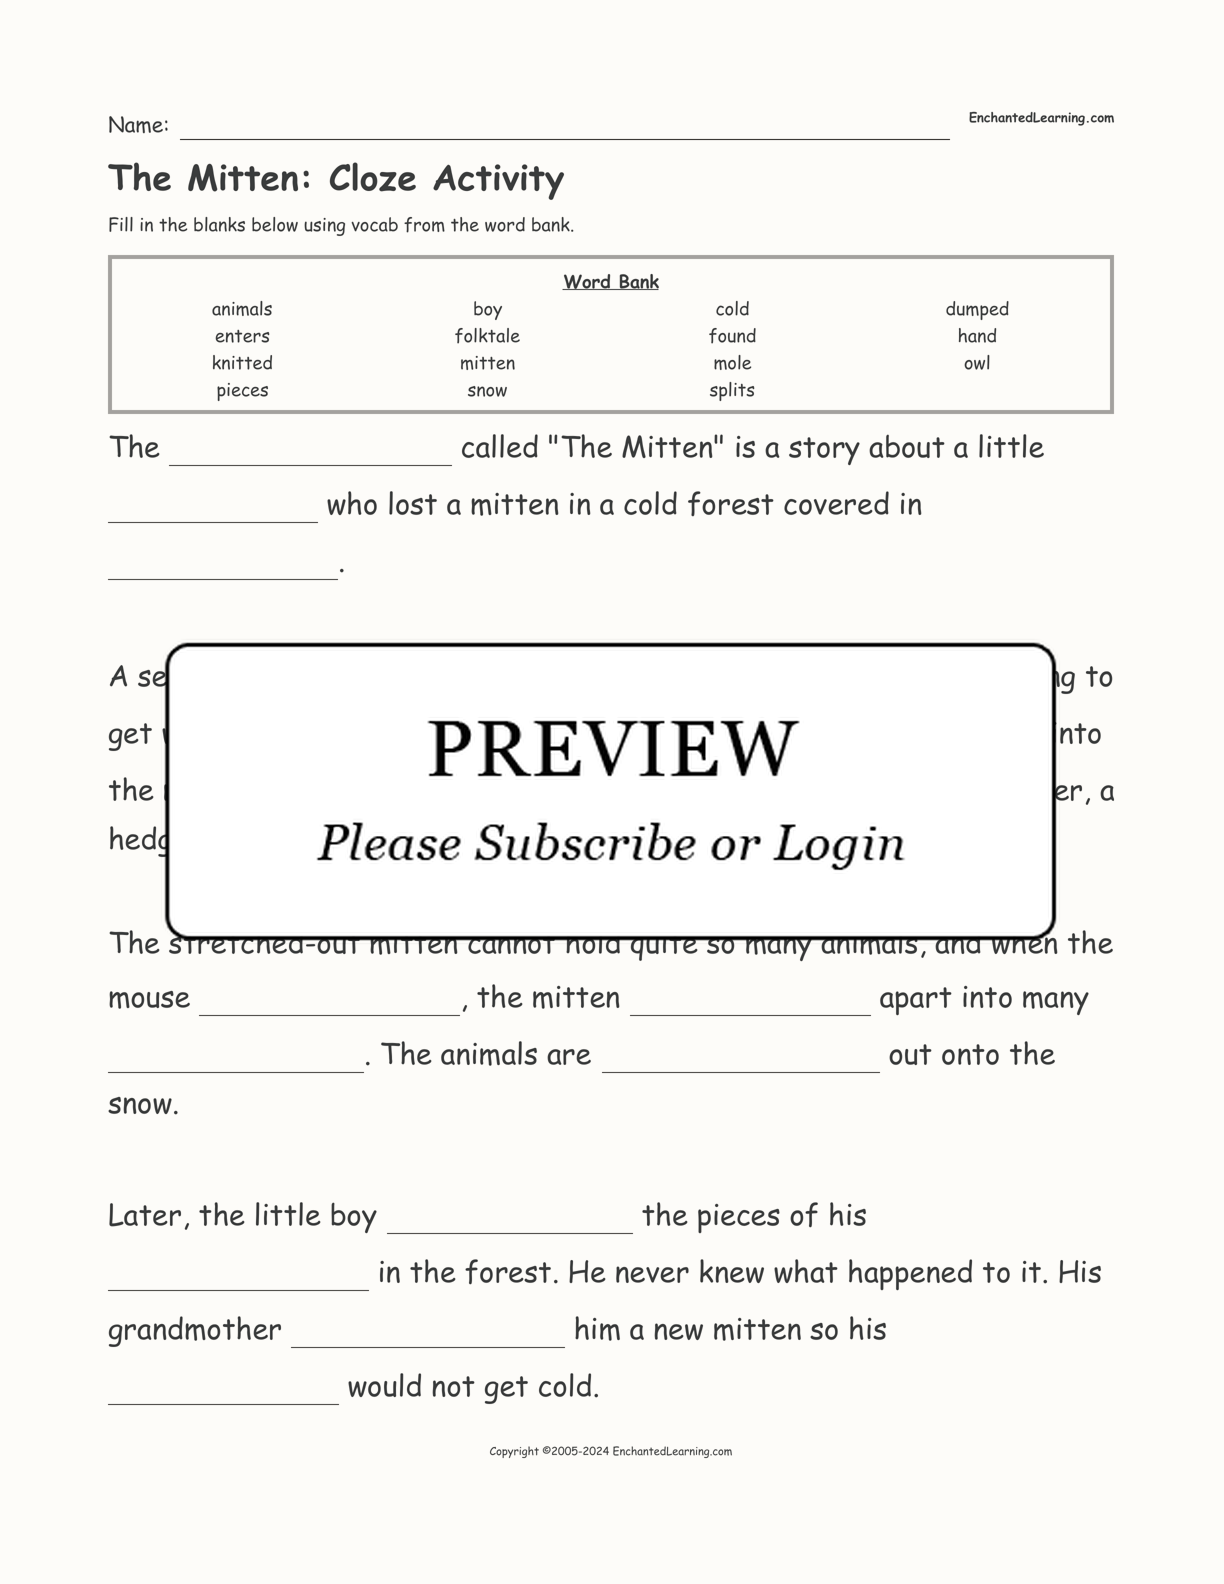 The Mitten: Cloze Activity interactive worksheet page 1